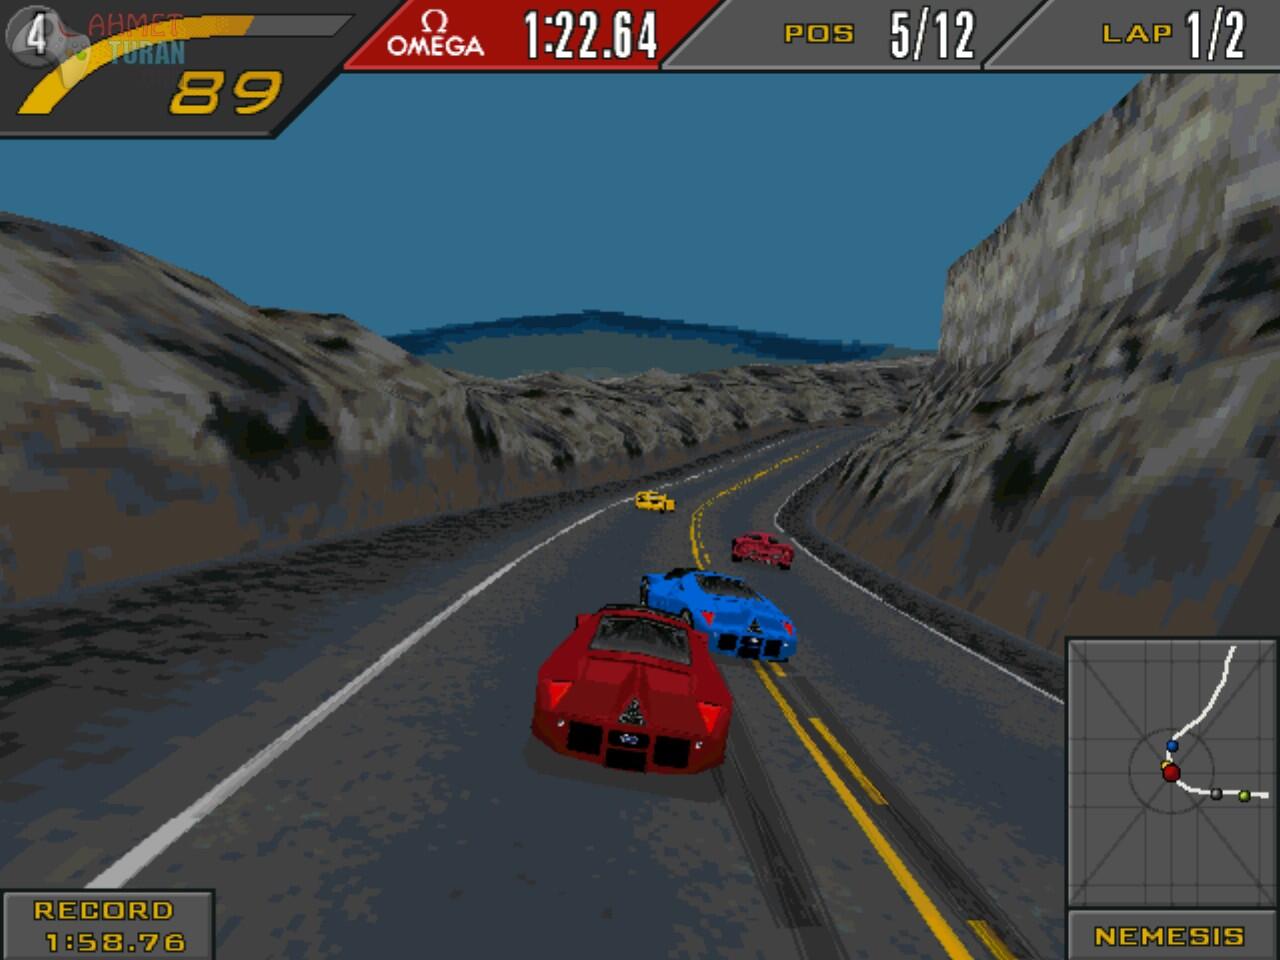 Speed gaming 2. Need for Speed II 1997. Need for Speed 2 se. Need for Speed 2 se 1997. Need for Speed 2 ps1.